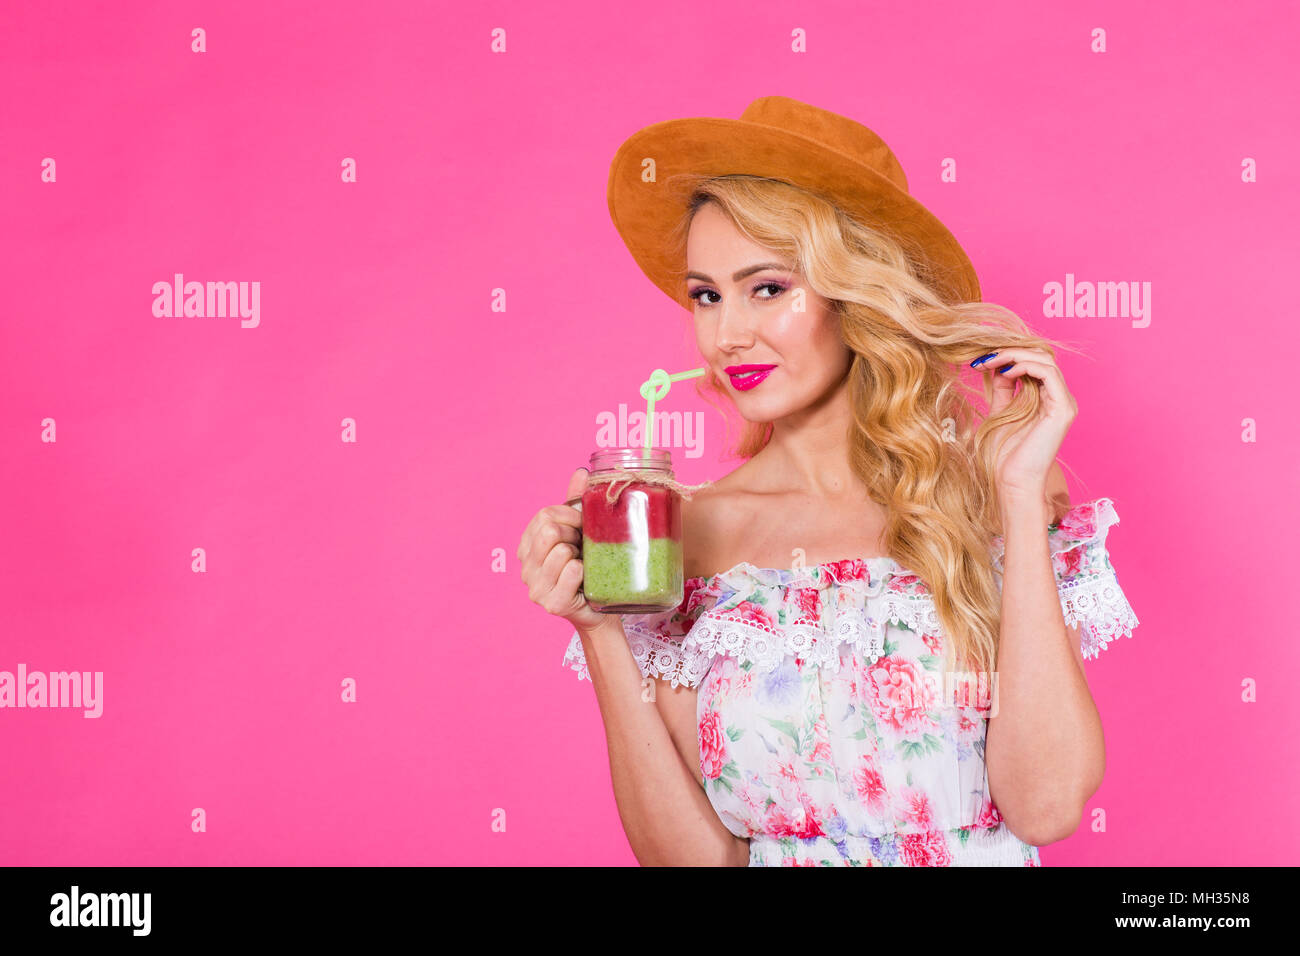 Cherry smoothie in a big glass cup with two straws in woman's hands,  isolated on white background. Lady with a drink Stock Photo - Alamy